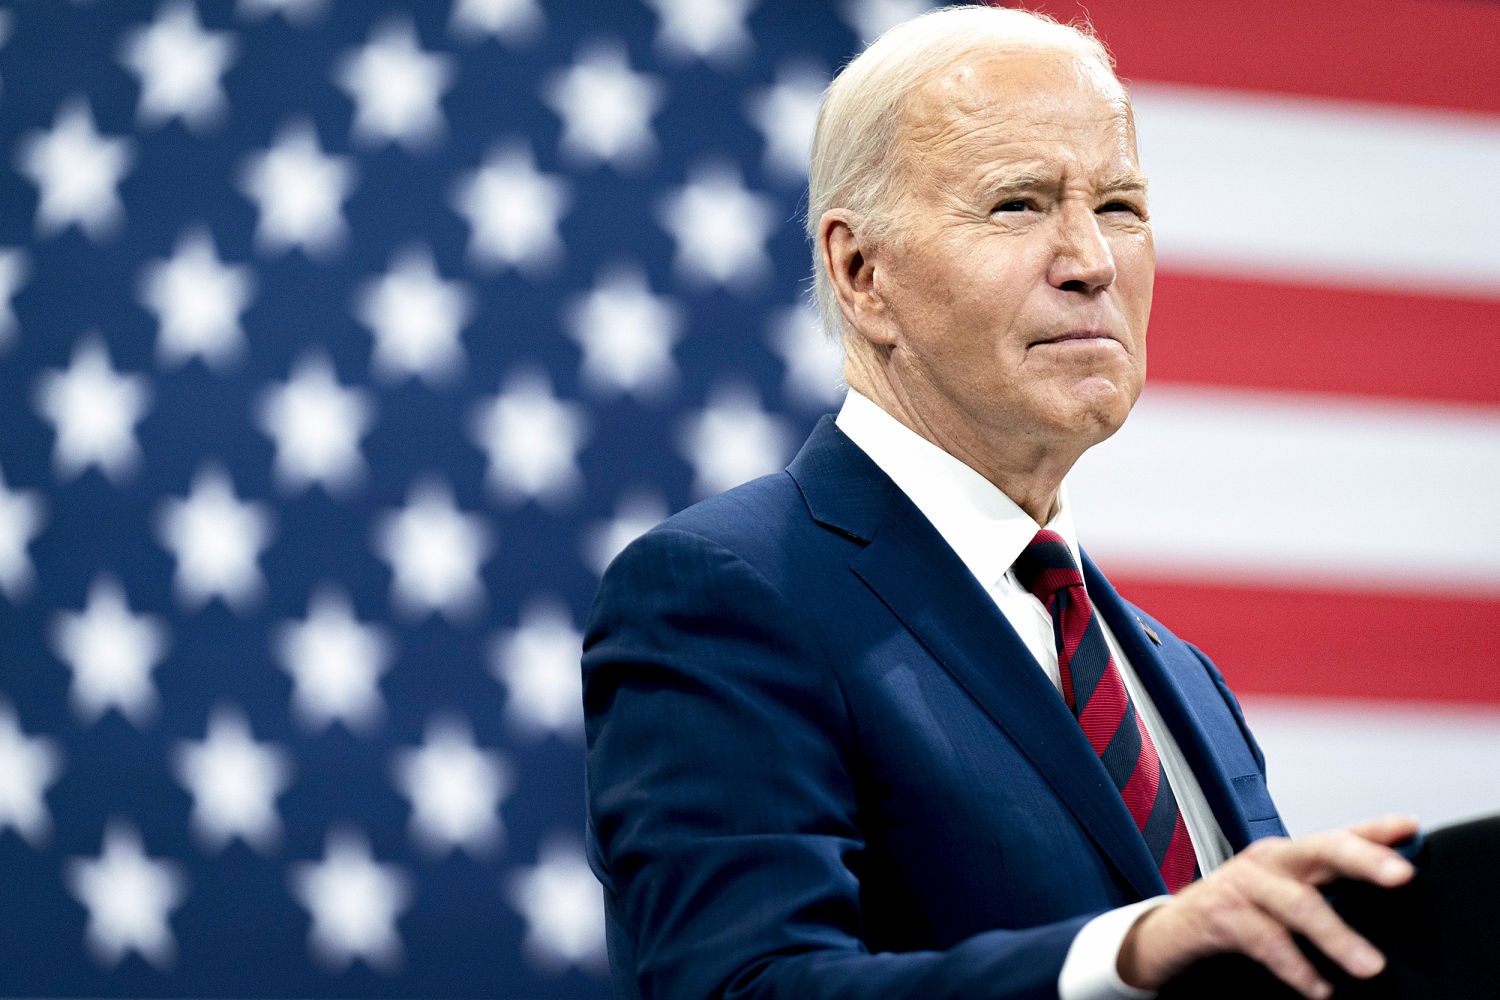 Democrats hope Biden can ride the party’s special election wave: From the Politics Desk